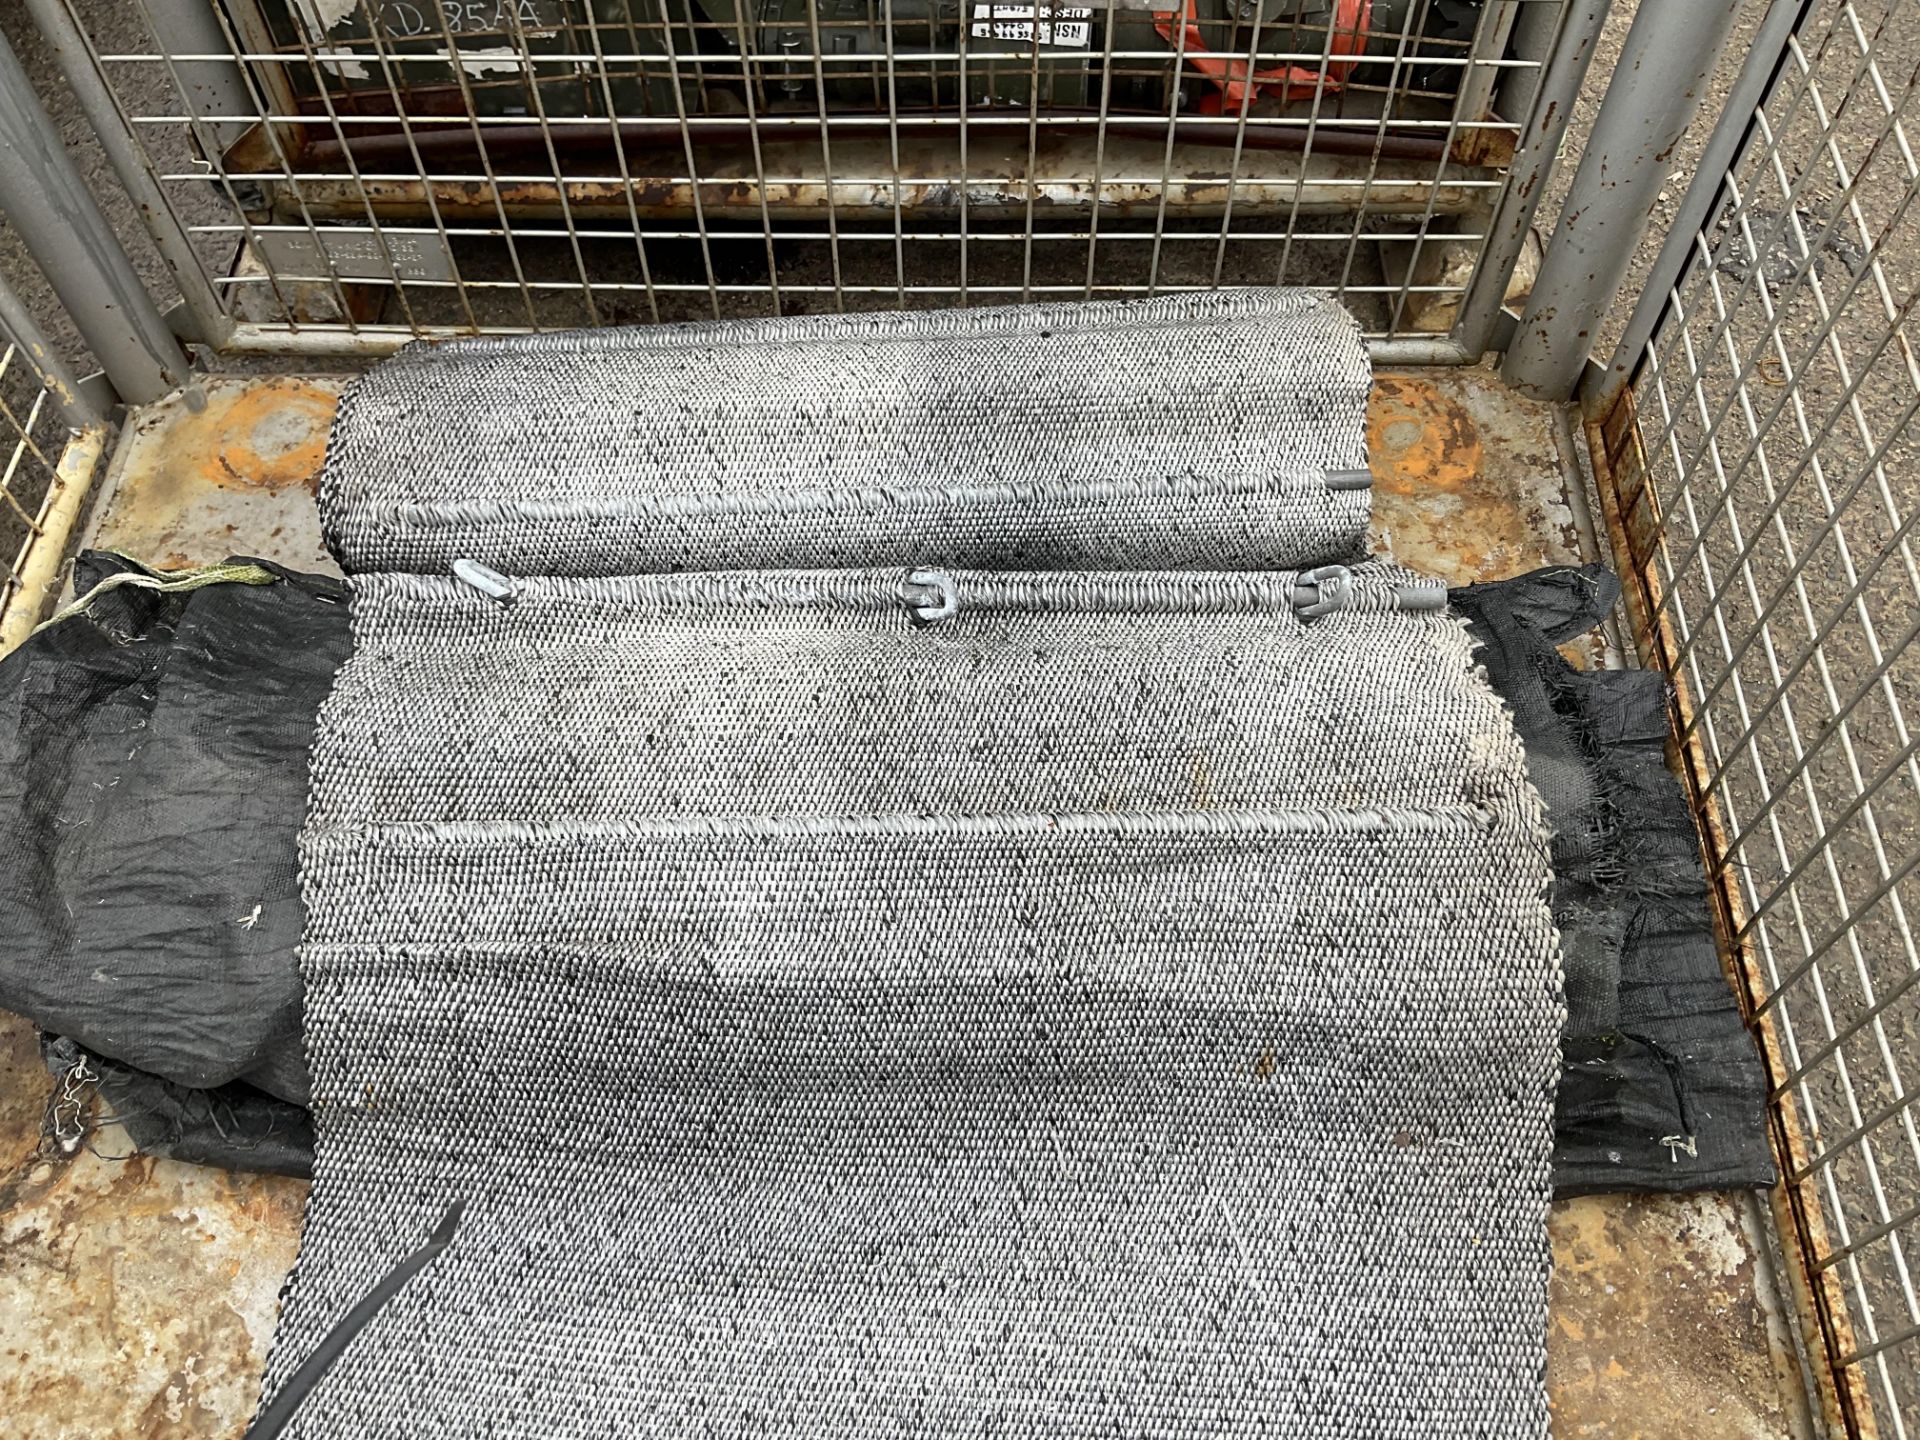 2X 11.5M X 0.5M BOG/SANDS MATS NOT USED BUT BEEN STORED - Image 2 of 2